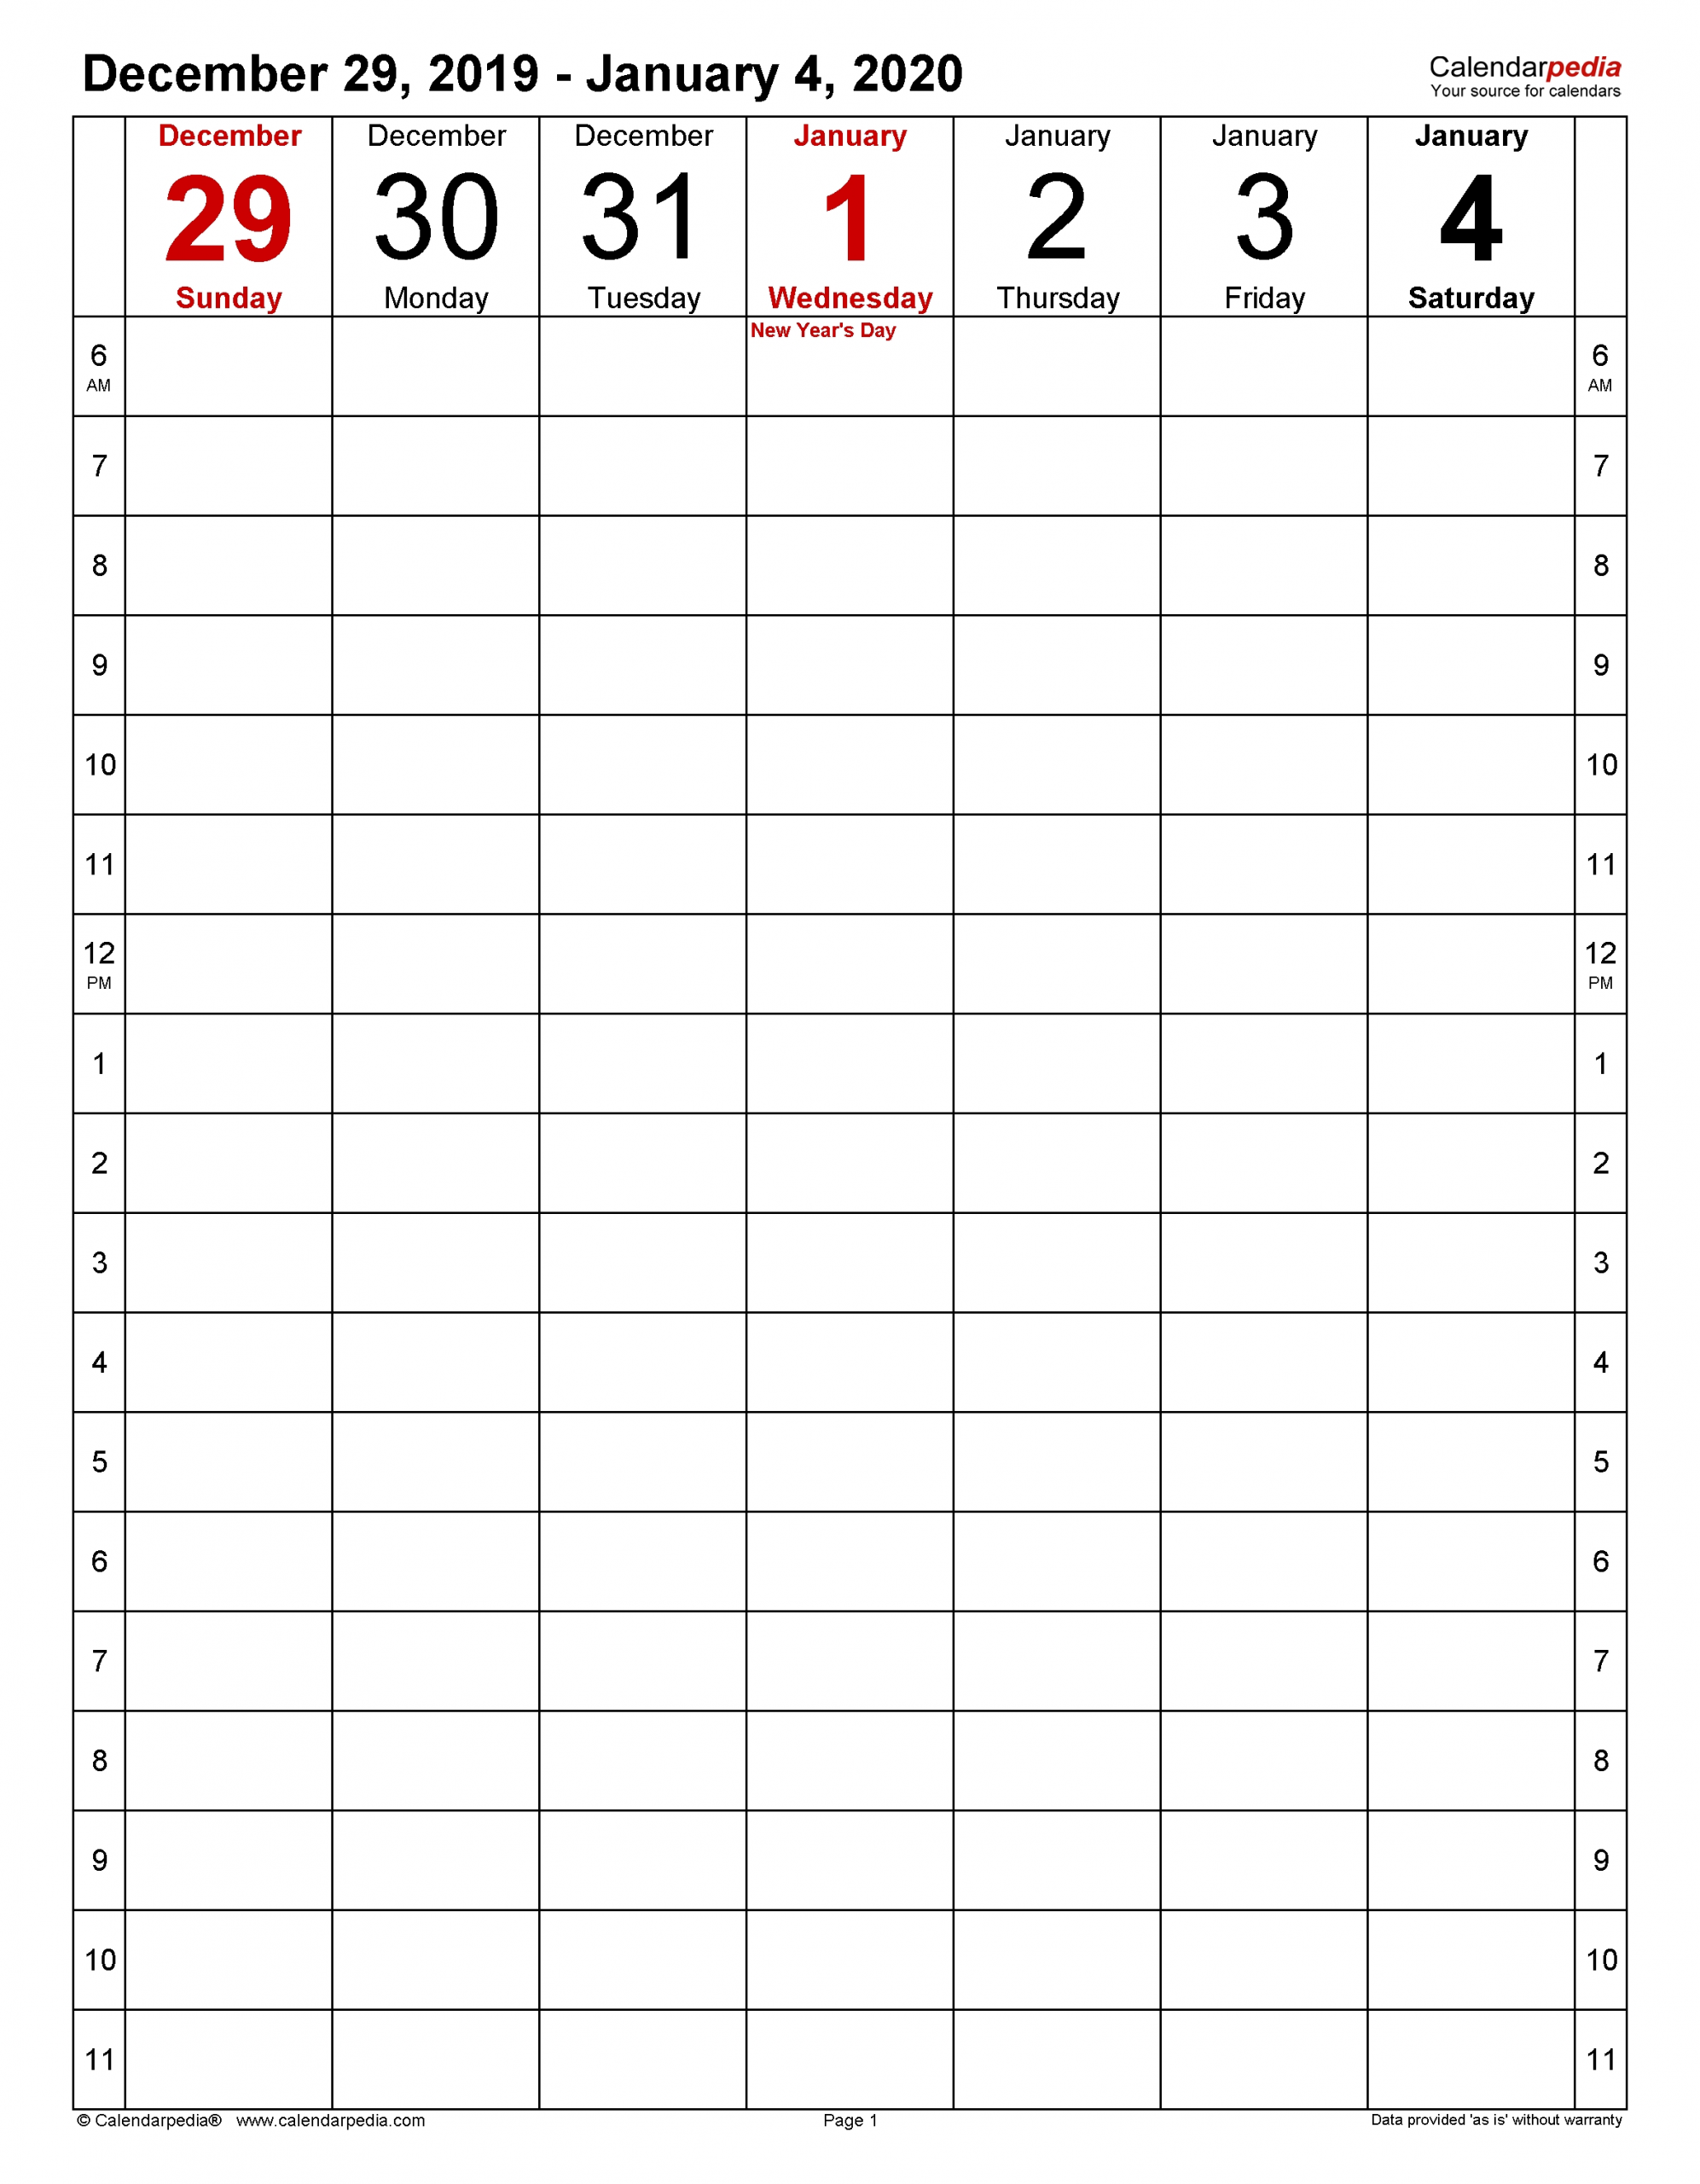 Weekly Calendars 2020 For Excel - 12 Free Printable Templates with regard to Free Excel Appointment Calendar 2020